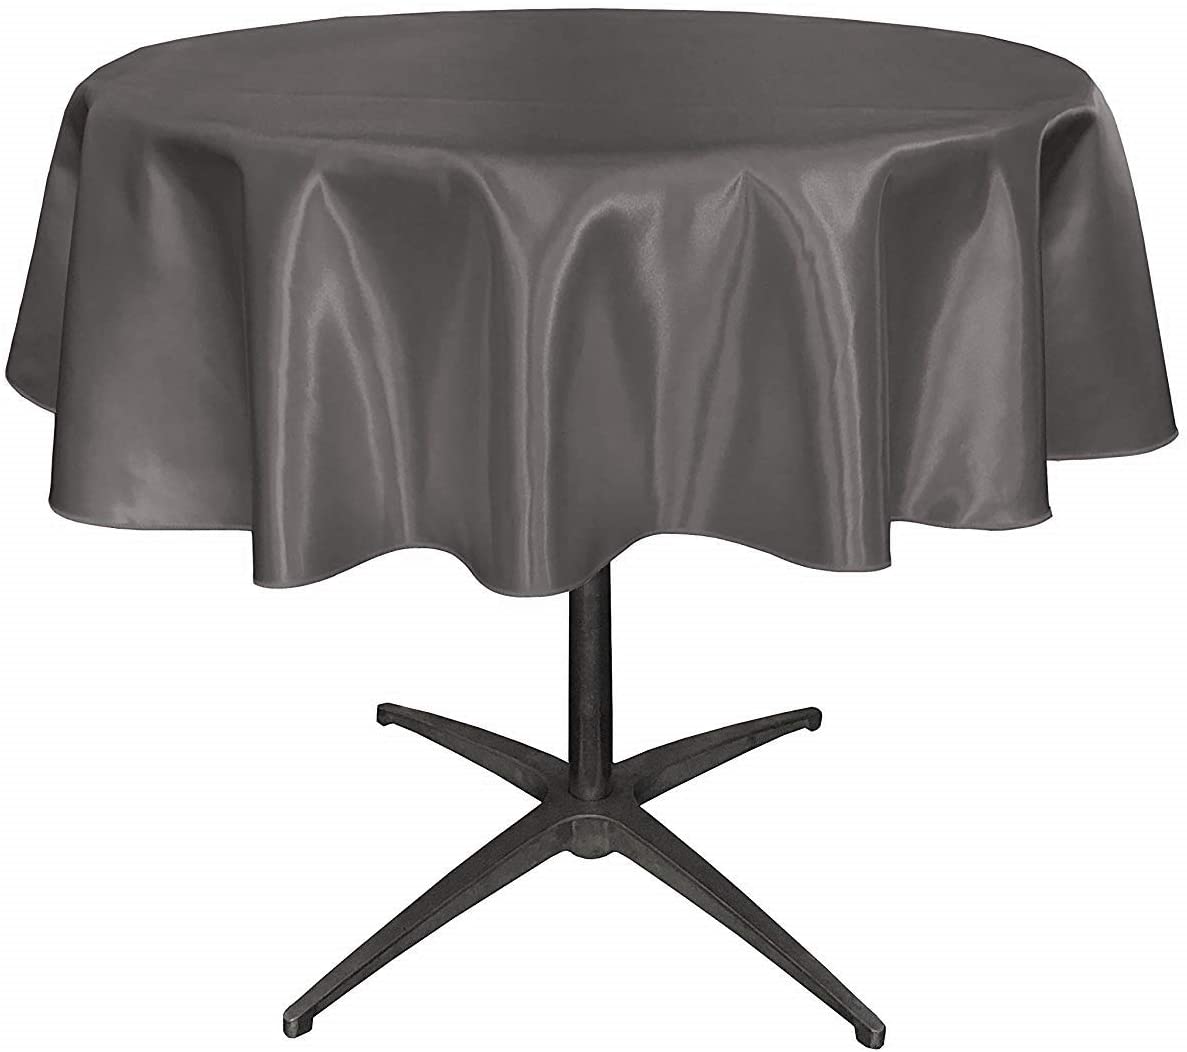 Bridal Satin Table Overlay, for Small Coffee Table (Charcoal,